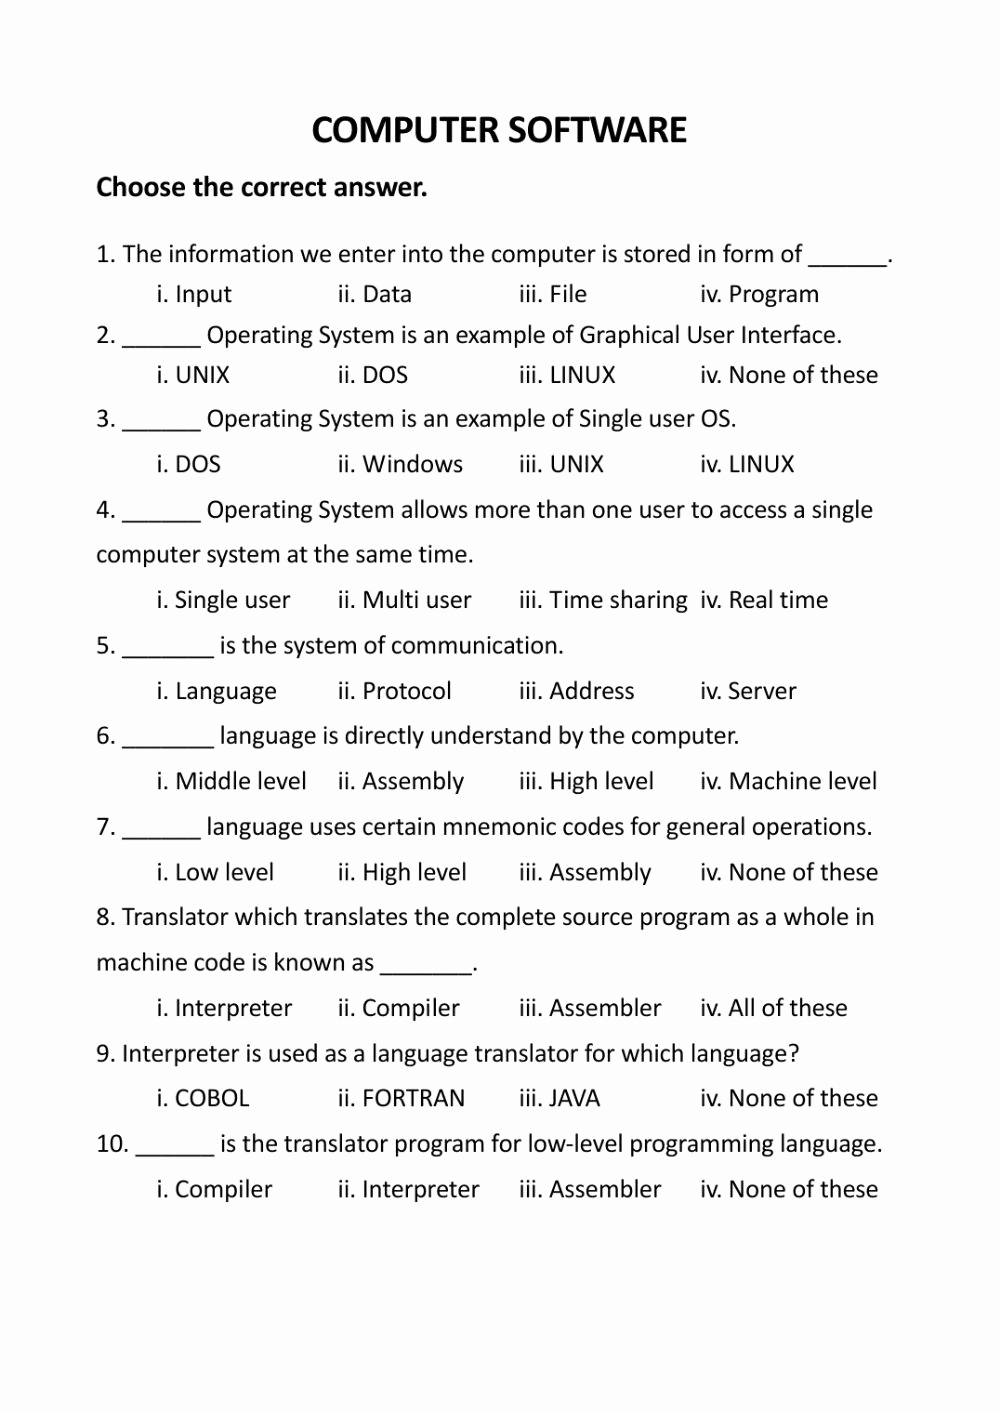 Computer Worksheets for Middle School Unique 20 Puter Worksheets for Middle School